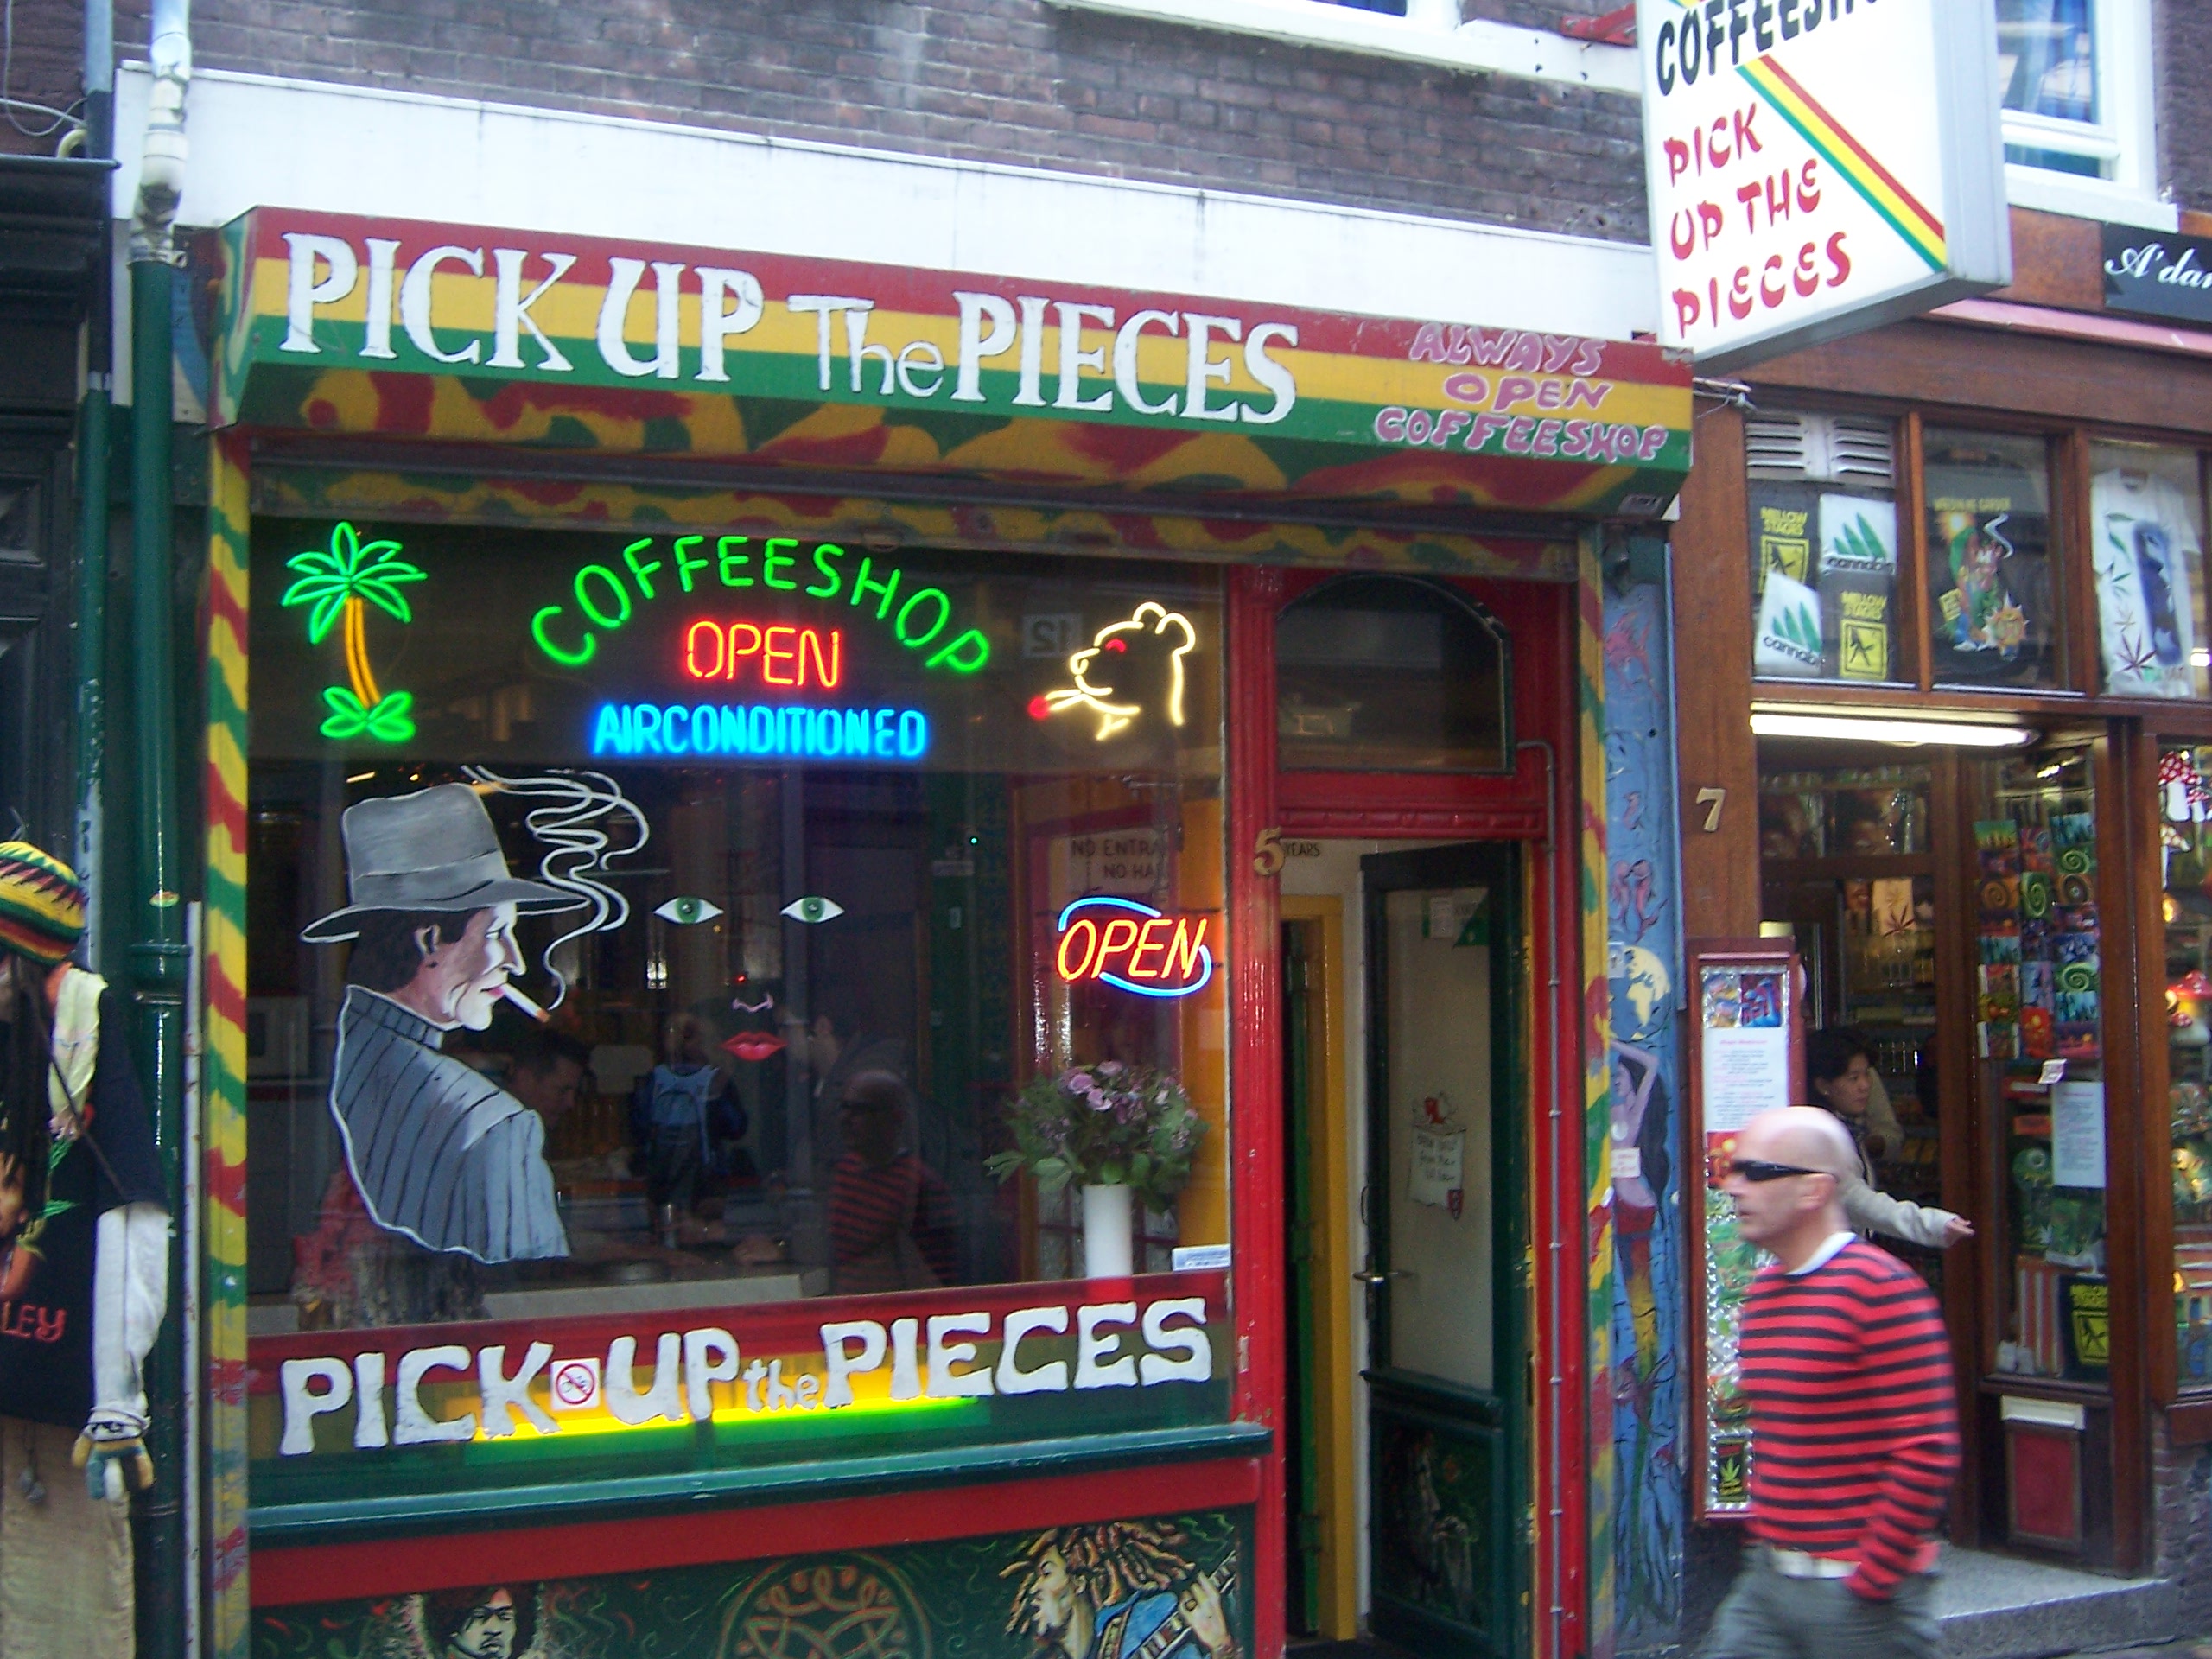 Coffee shop in Amsterdam (Source: Wikimedia Commons)